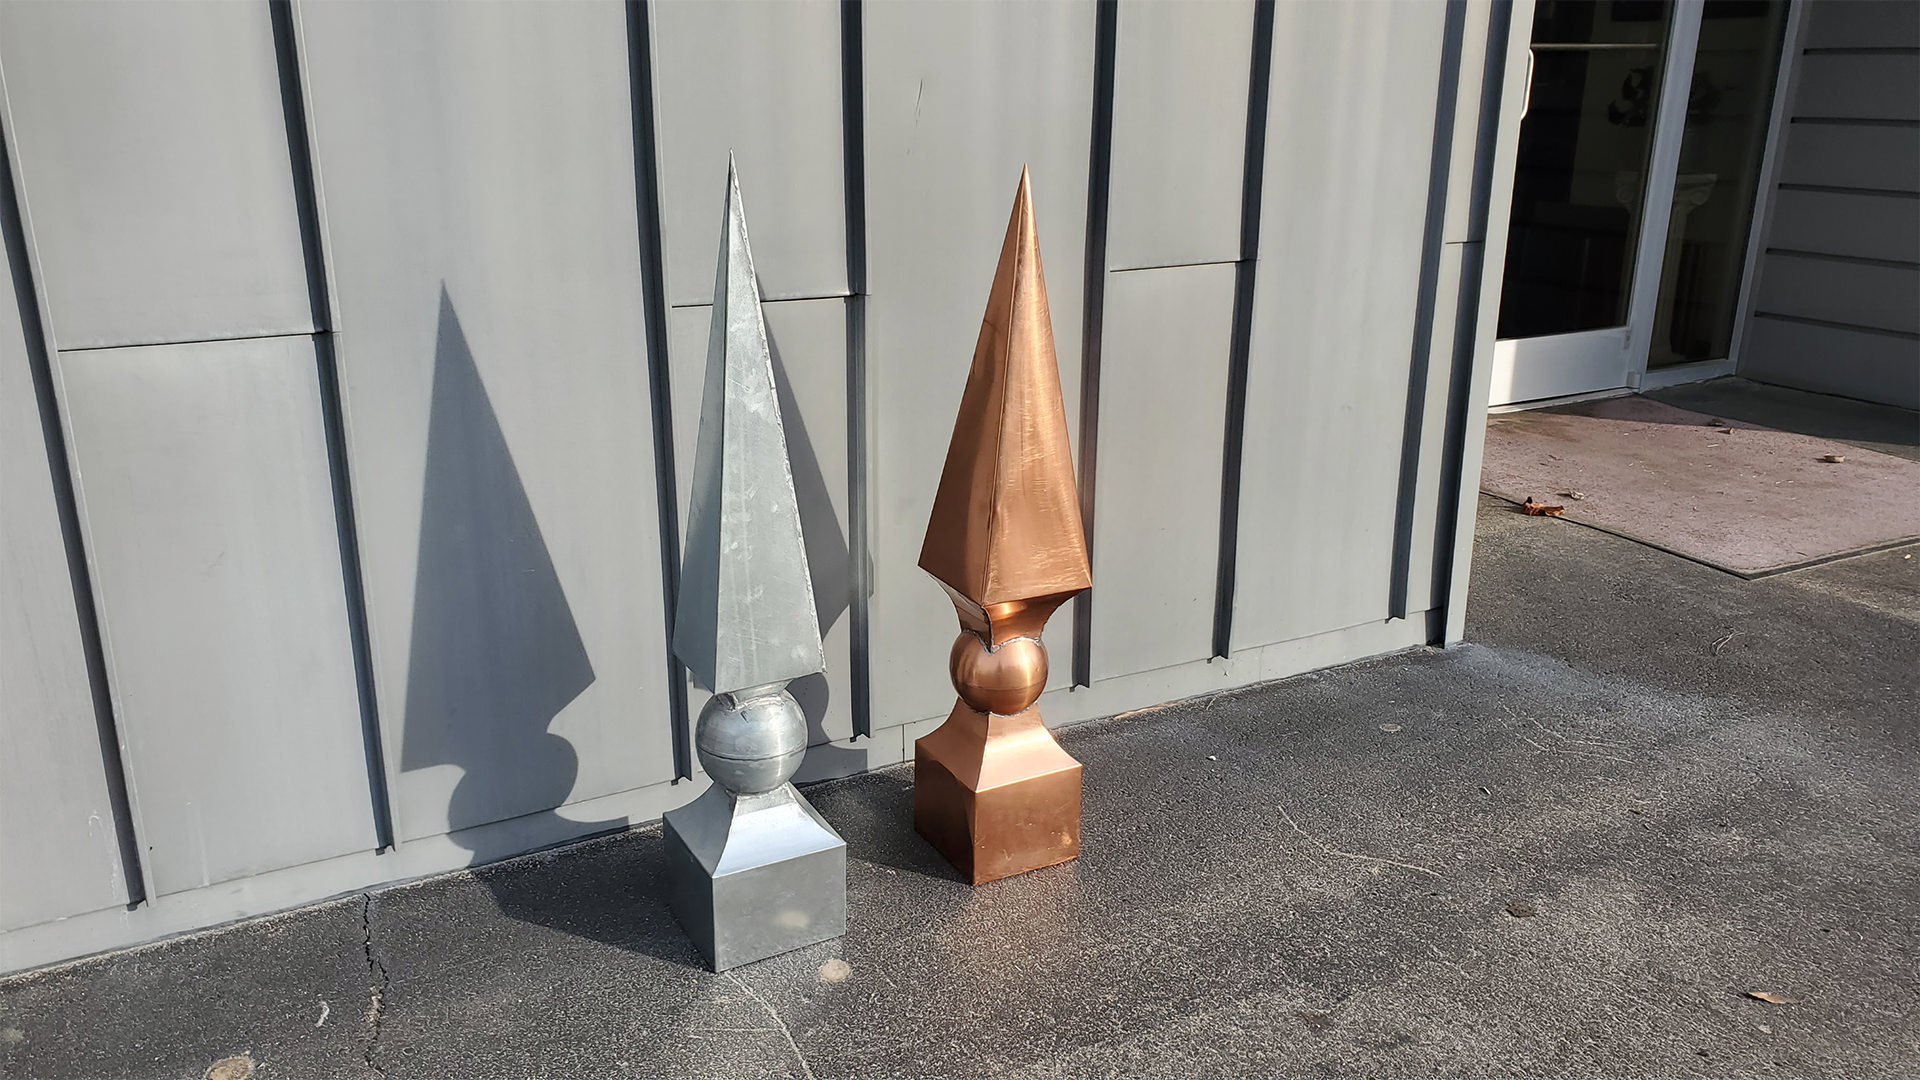 The pinnacle finial in copper and galvanized steel